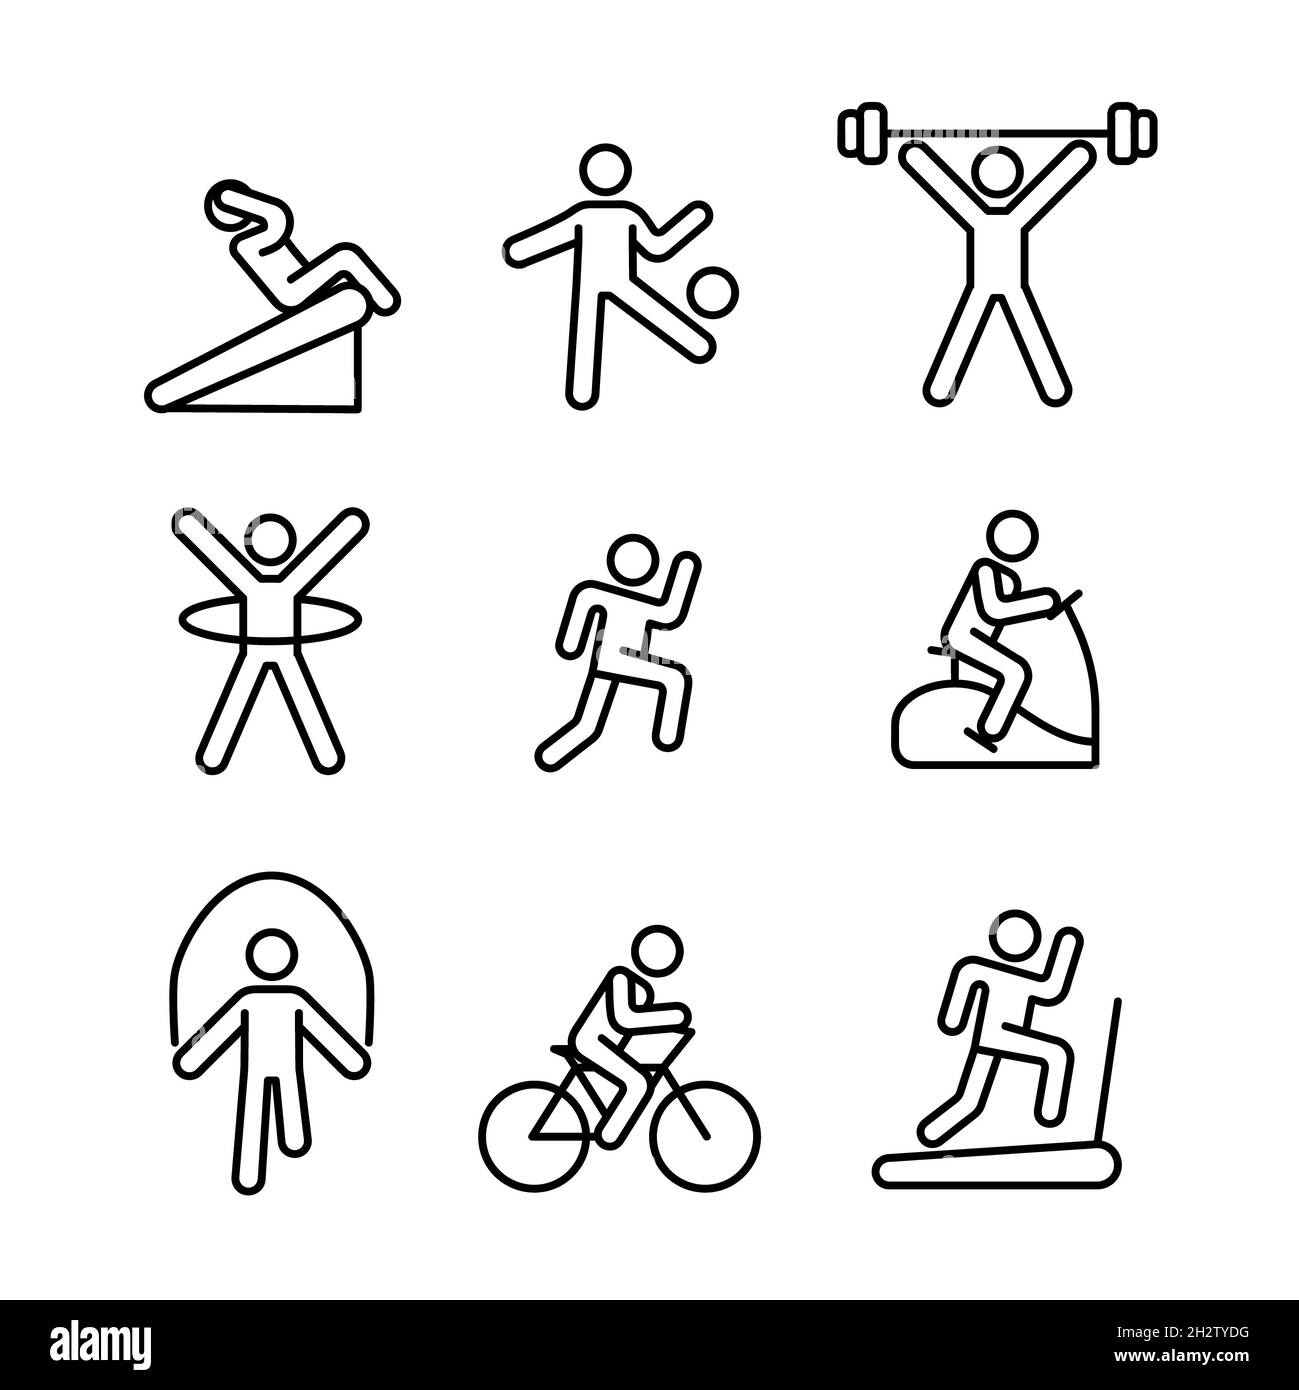 Healhty fitness icon. Flat sport pictogram for web. Line stroke. Simple gym  and diet symbols in stack isolated on white background. Outline icon vecto  Stock Photo - Alamy